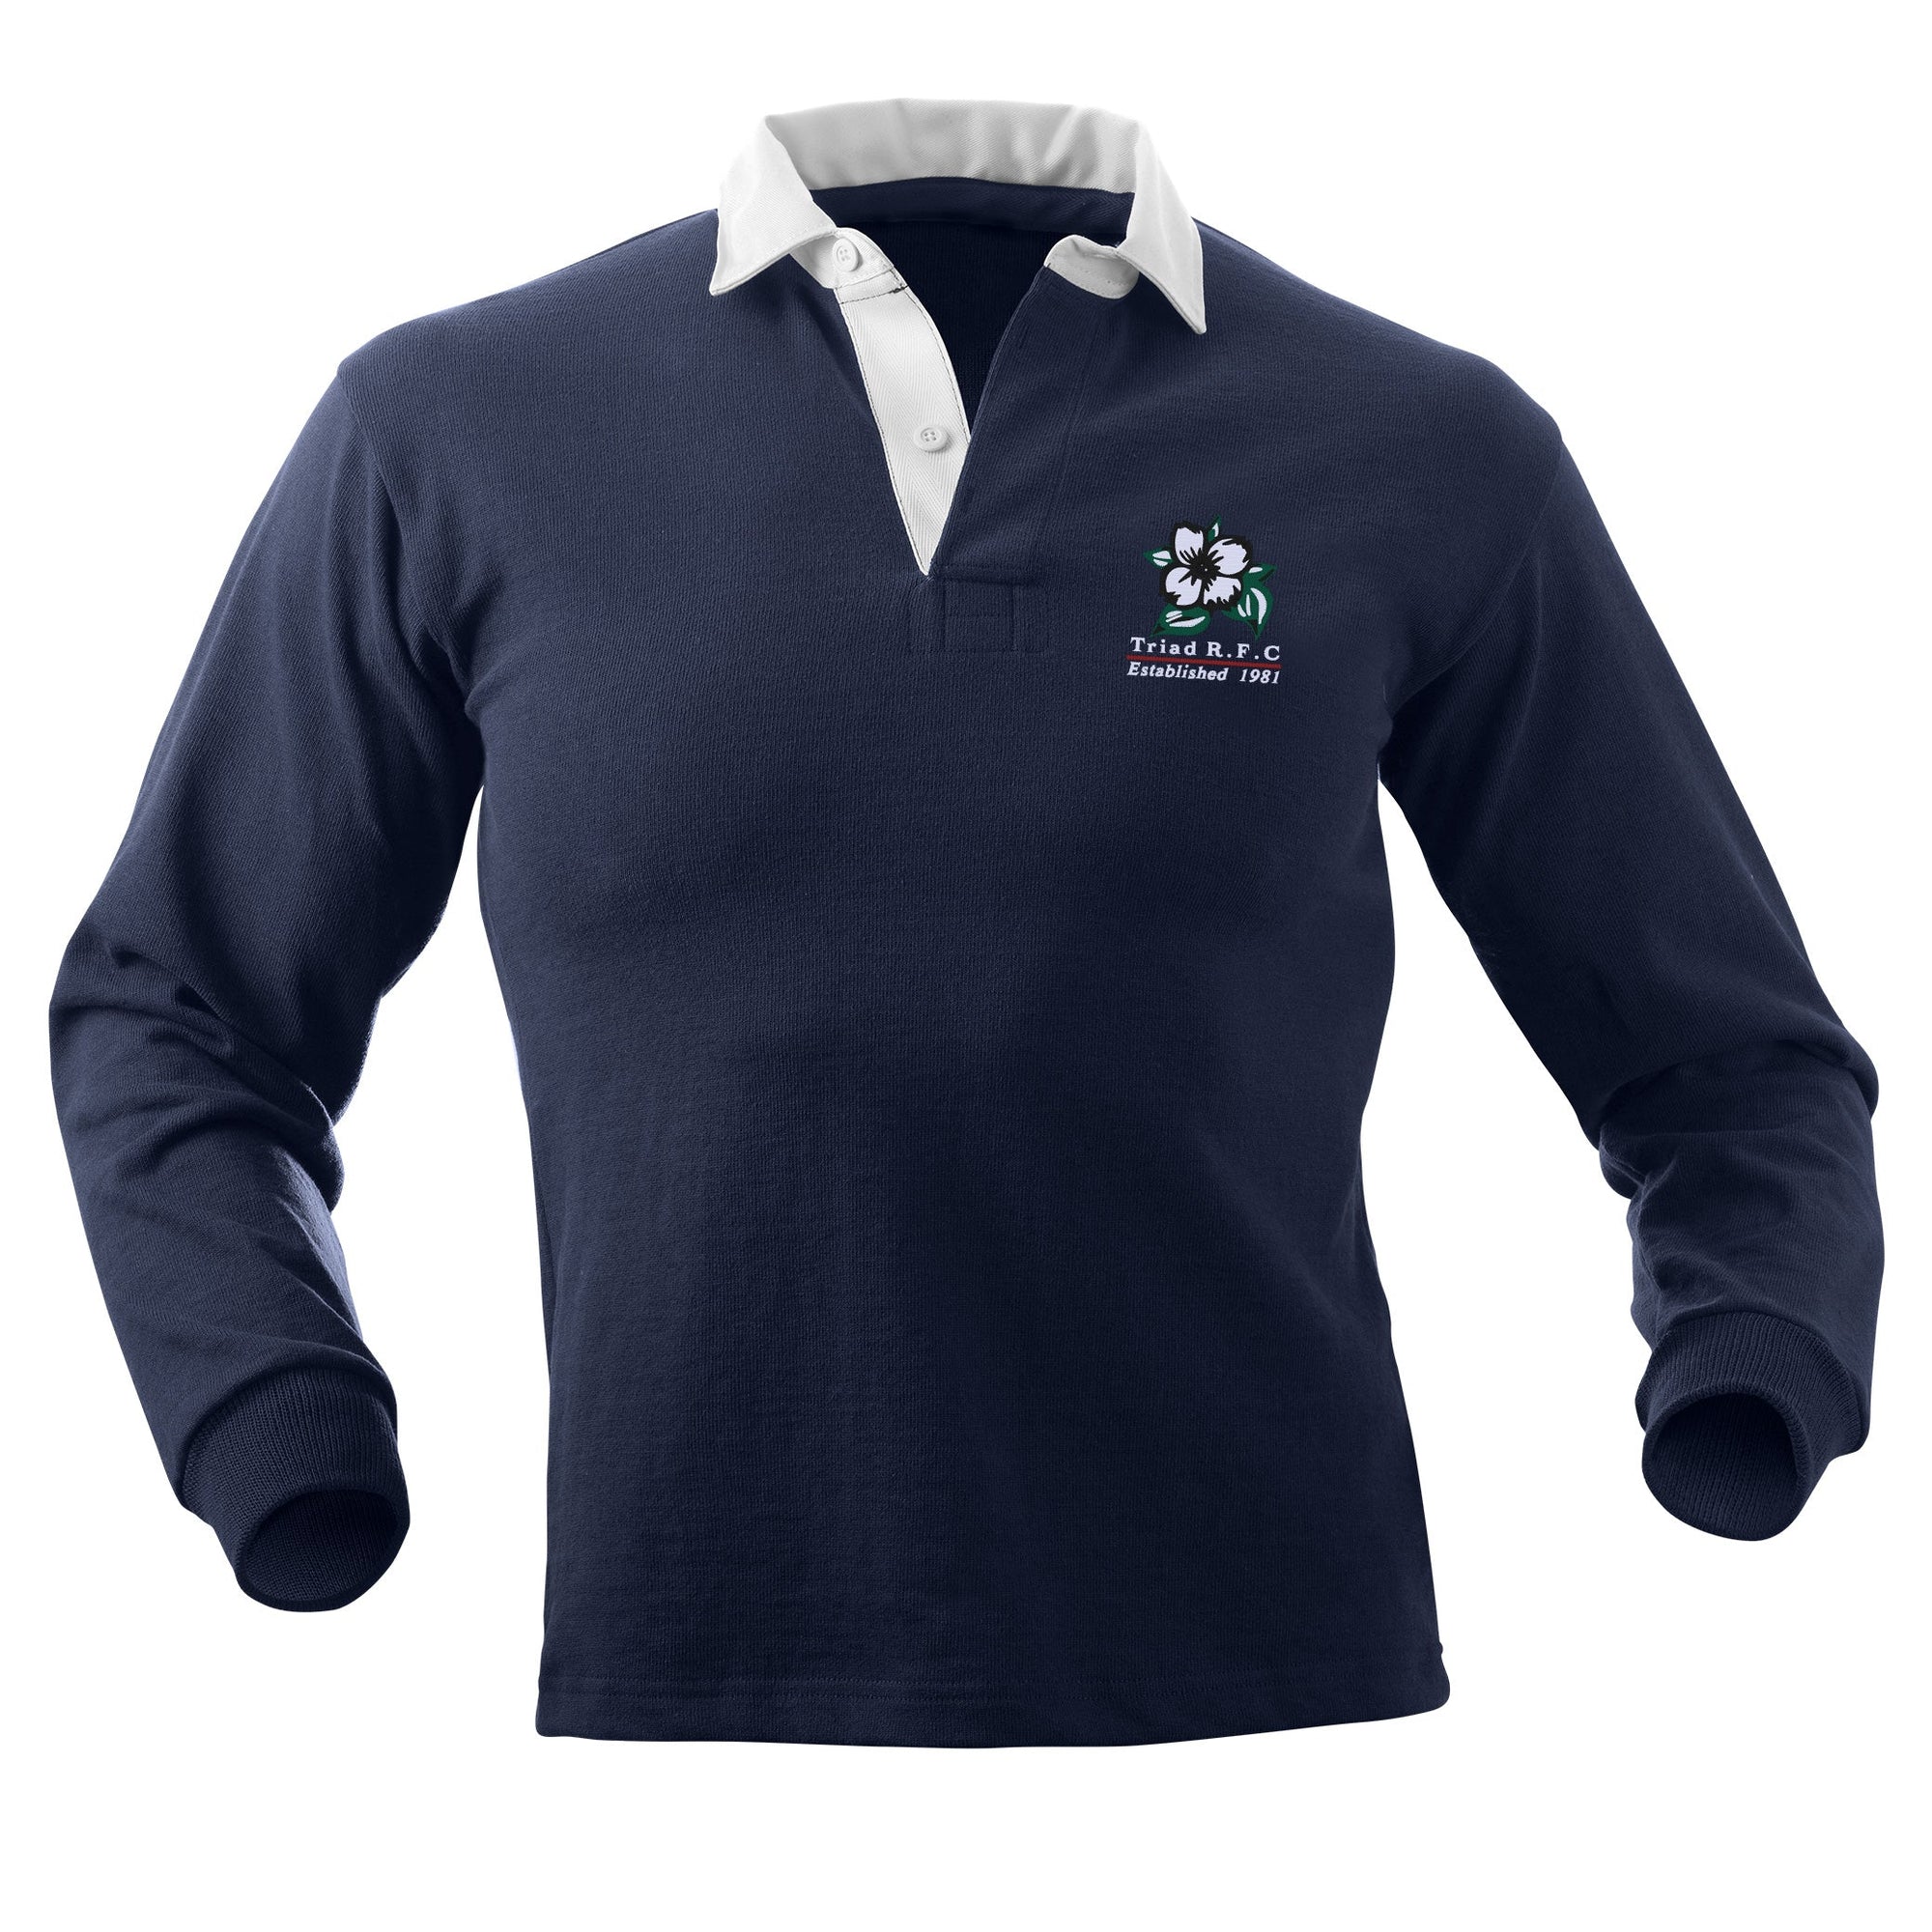 Rugby Imports Triad RFC Traditional Jersey